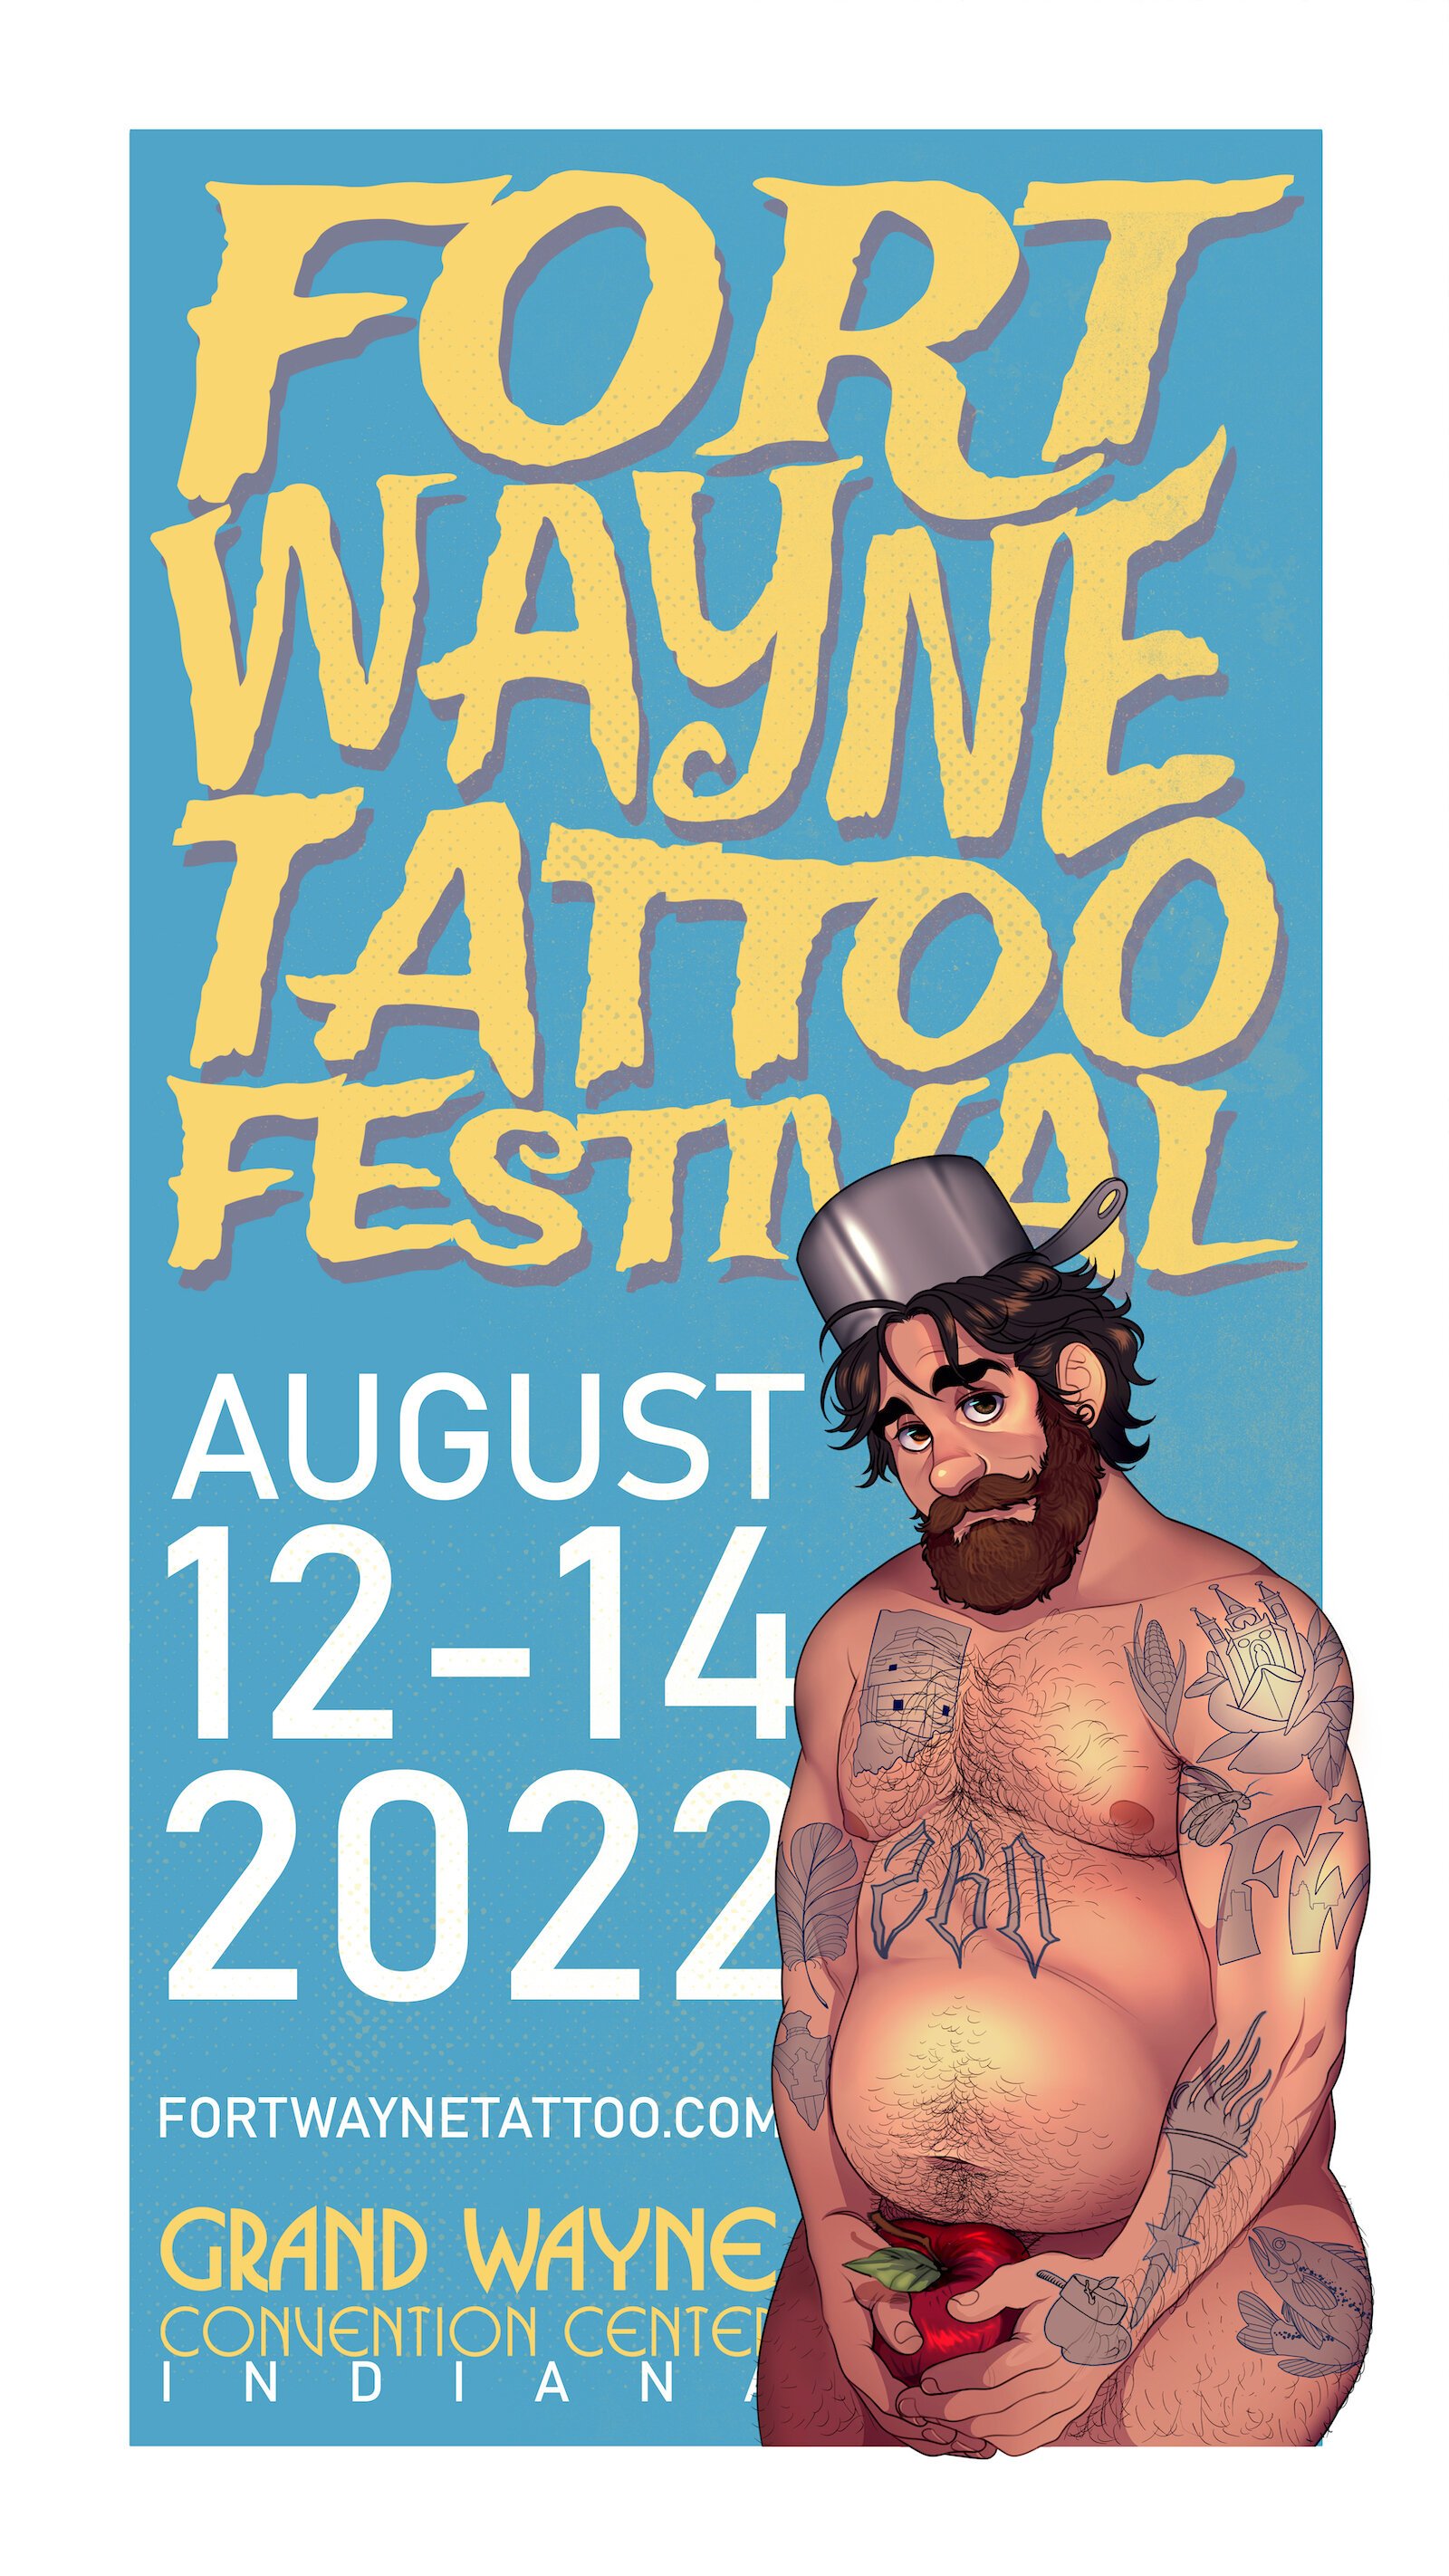 Poster for the Fort Wayne Tattoo Festival